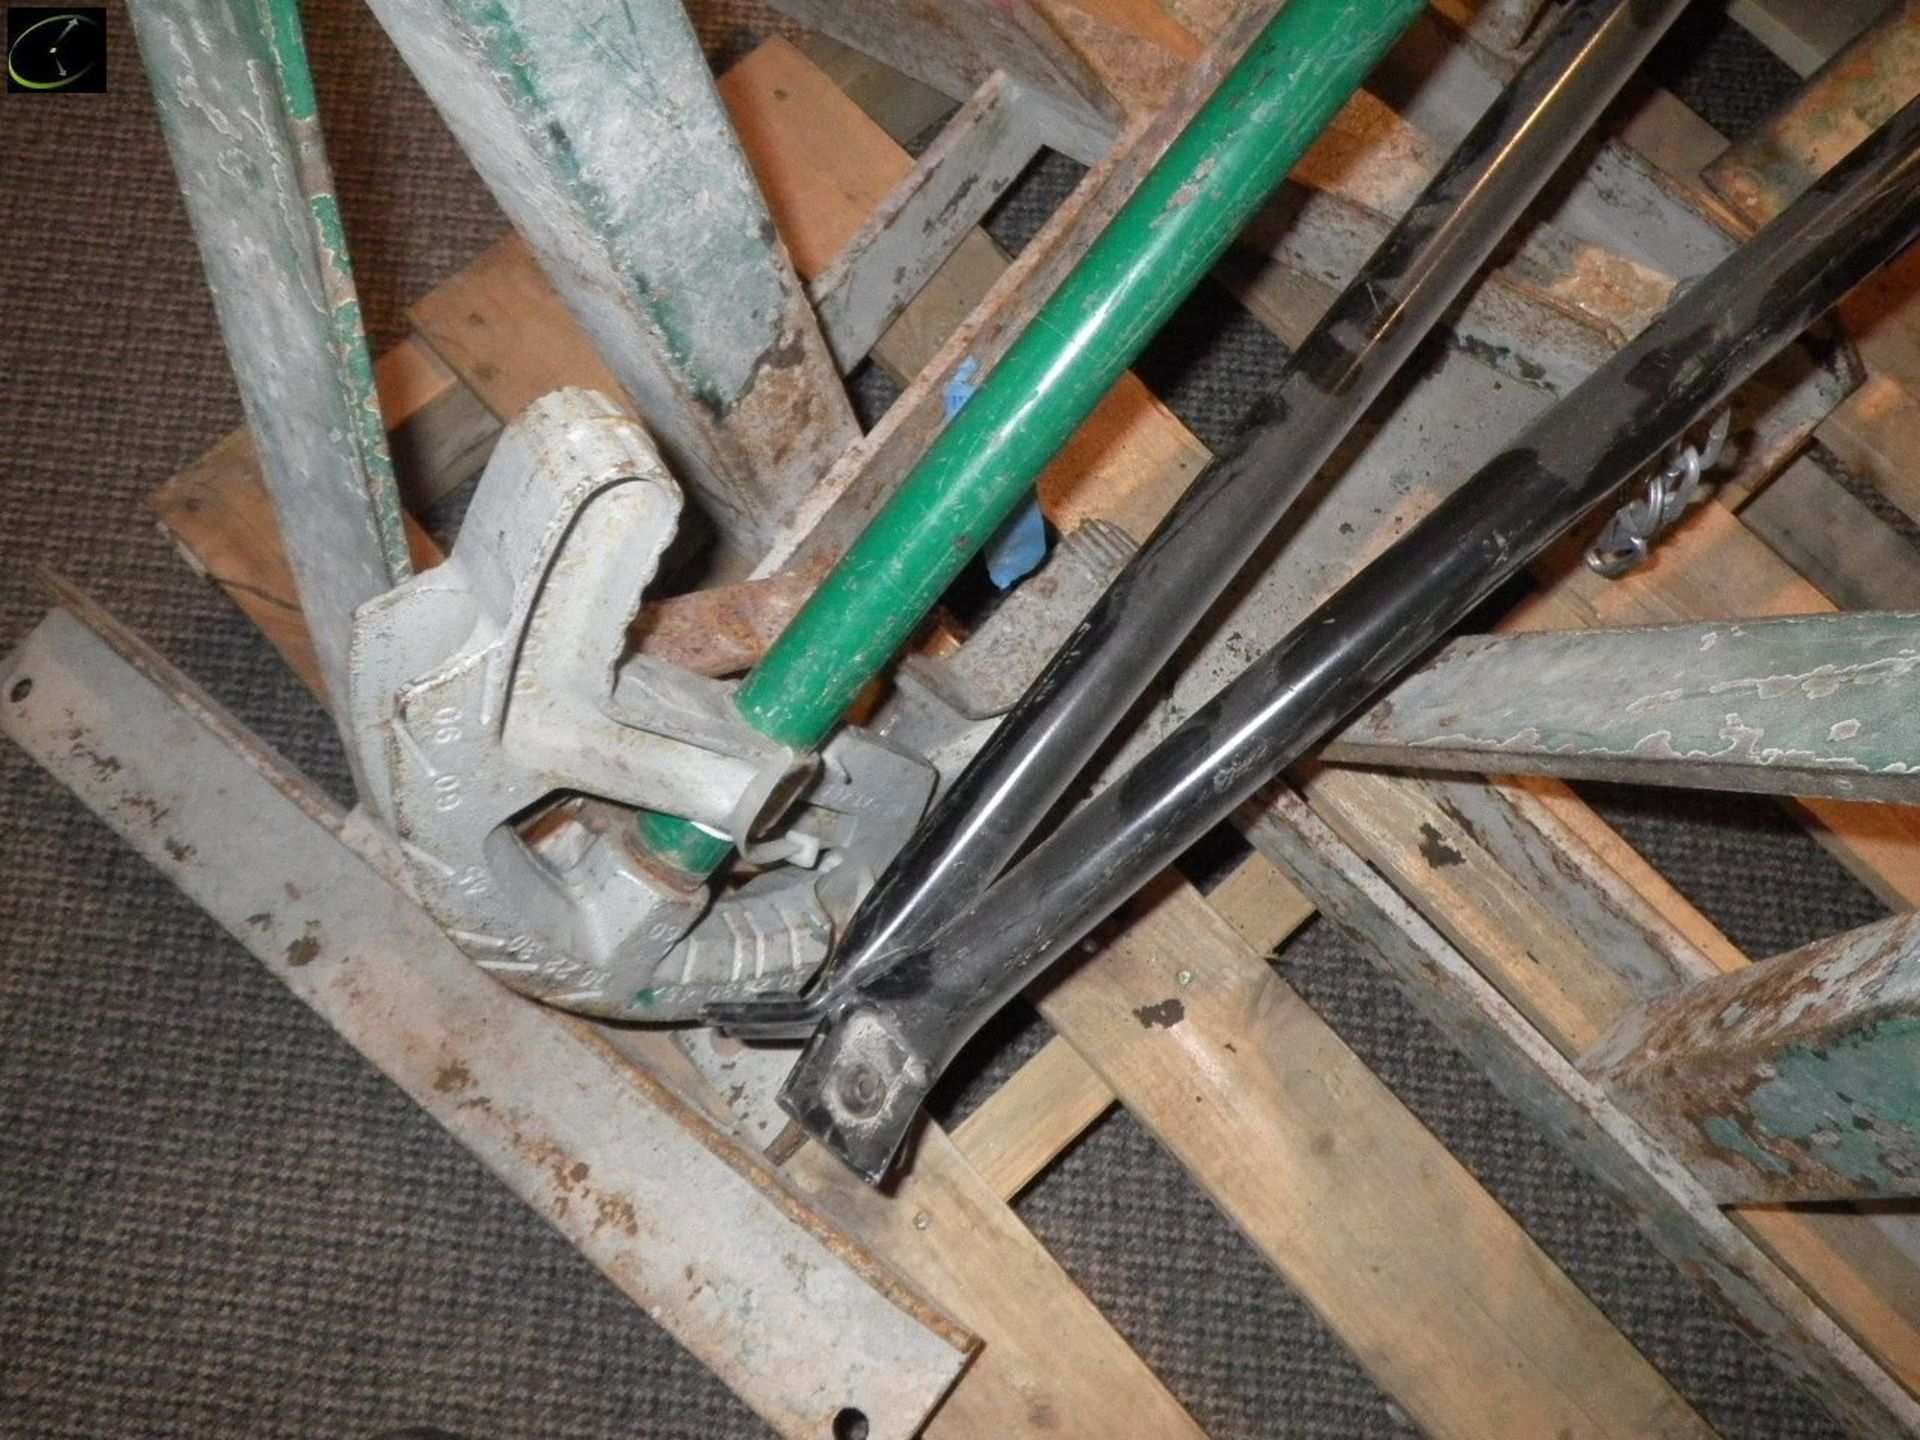 FOUR Pipe Roller Stands, RIGID Pipe Stand, TWO Pipe Benders. - Image 3 of 4